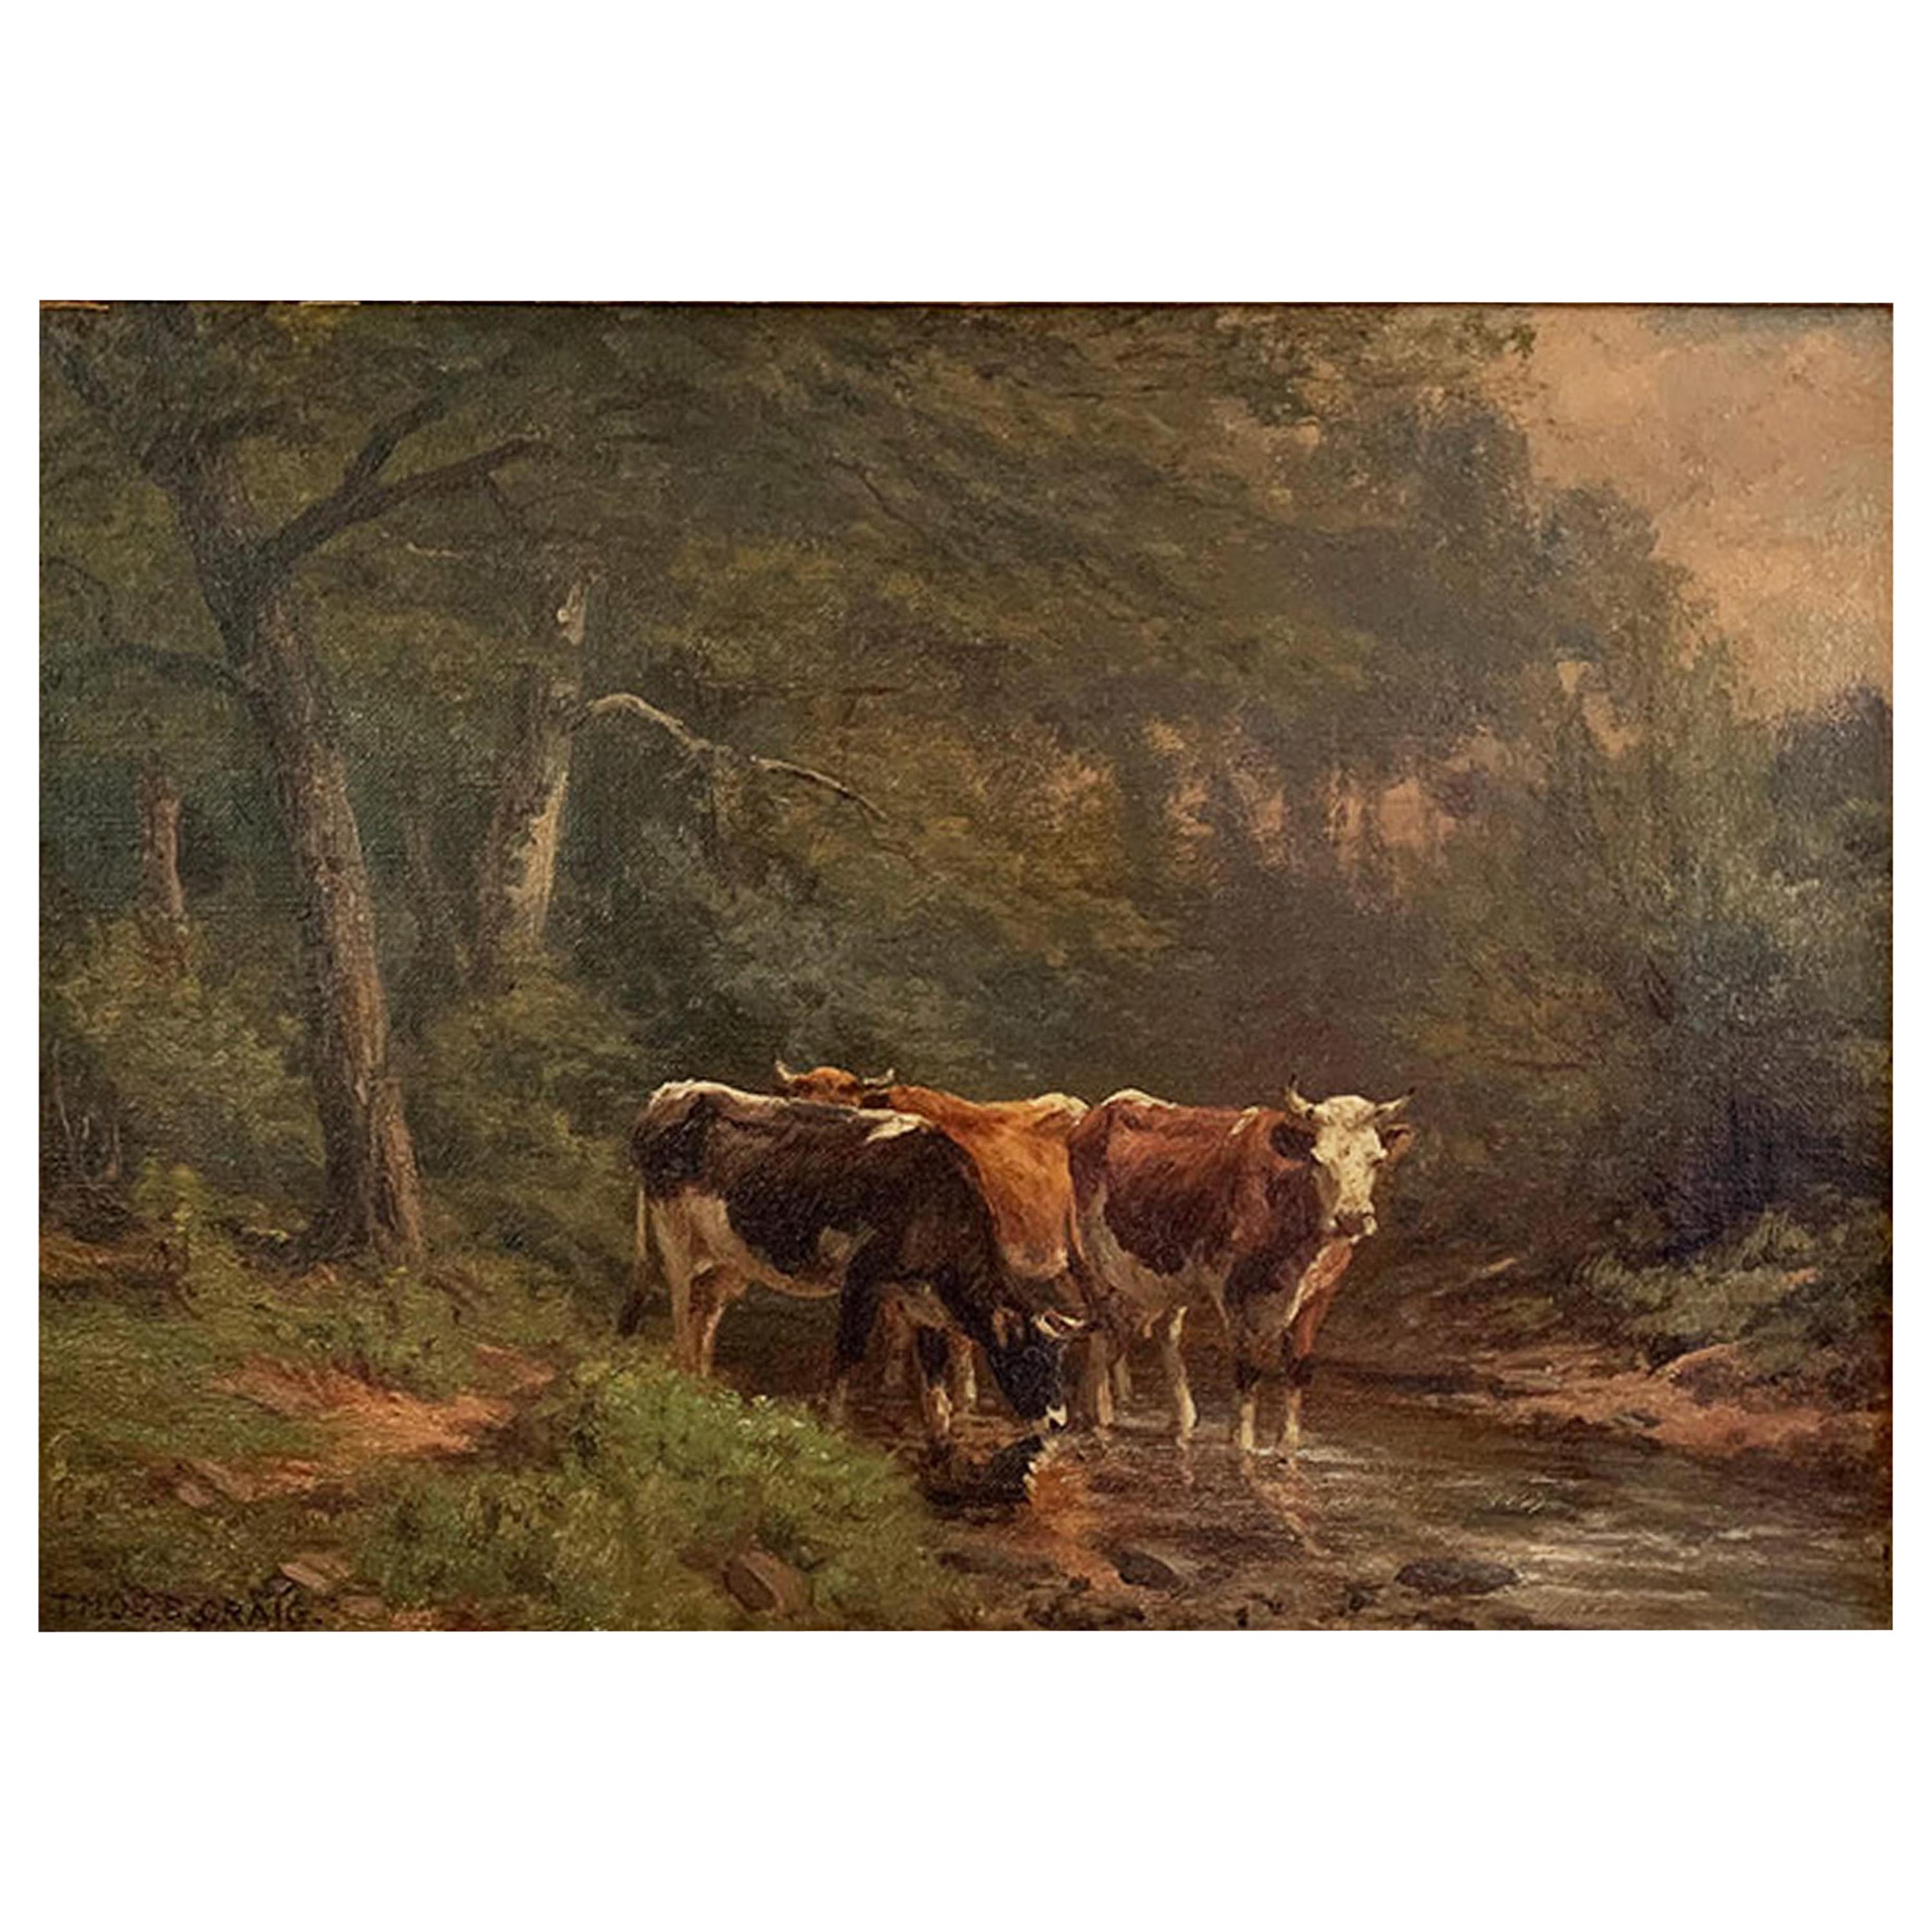 Craig Thomas Bigelow "Cows in a Stream" For Sale